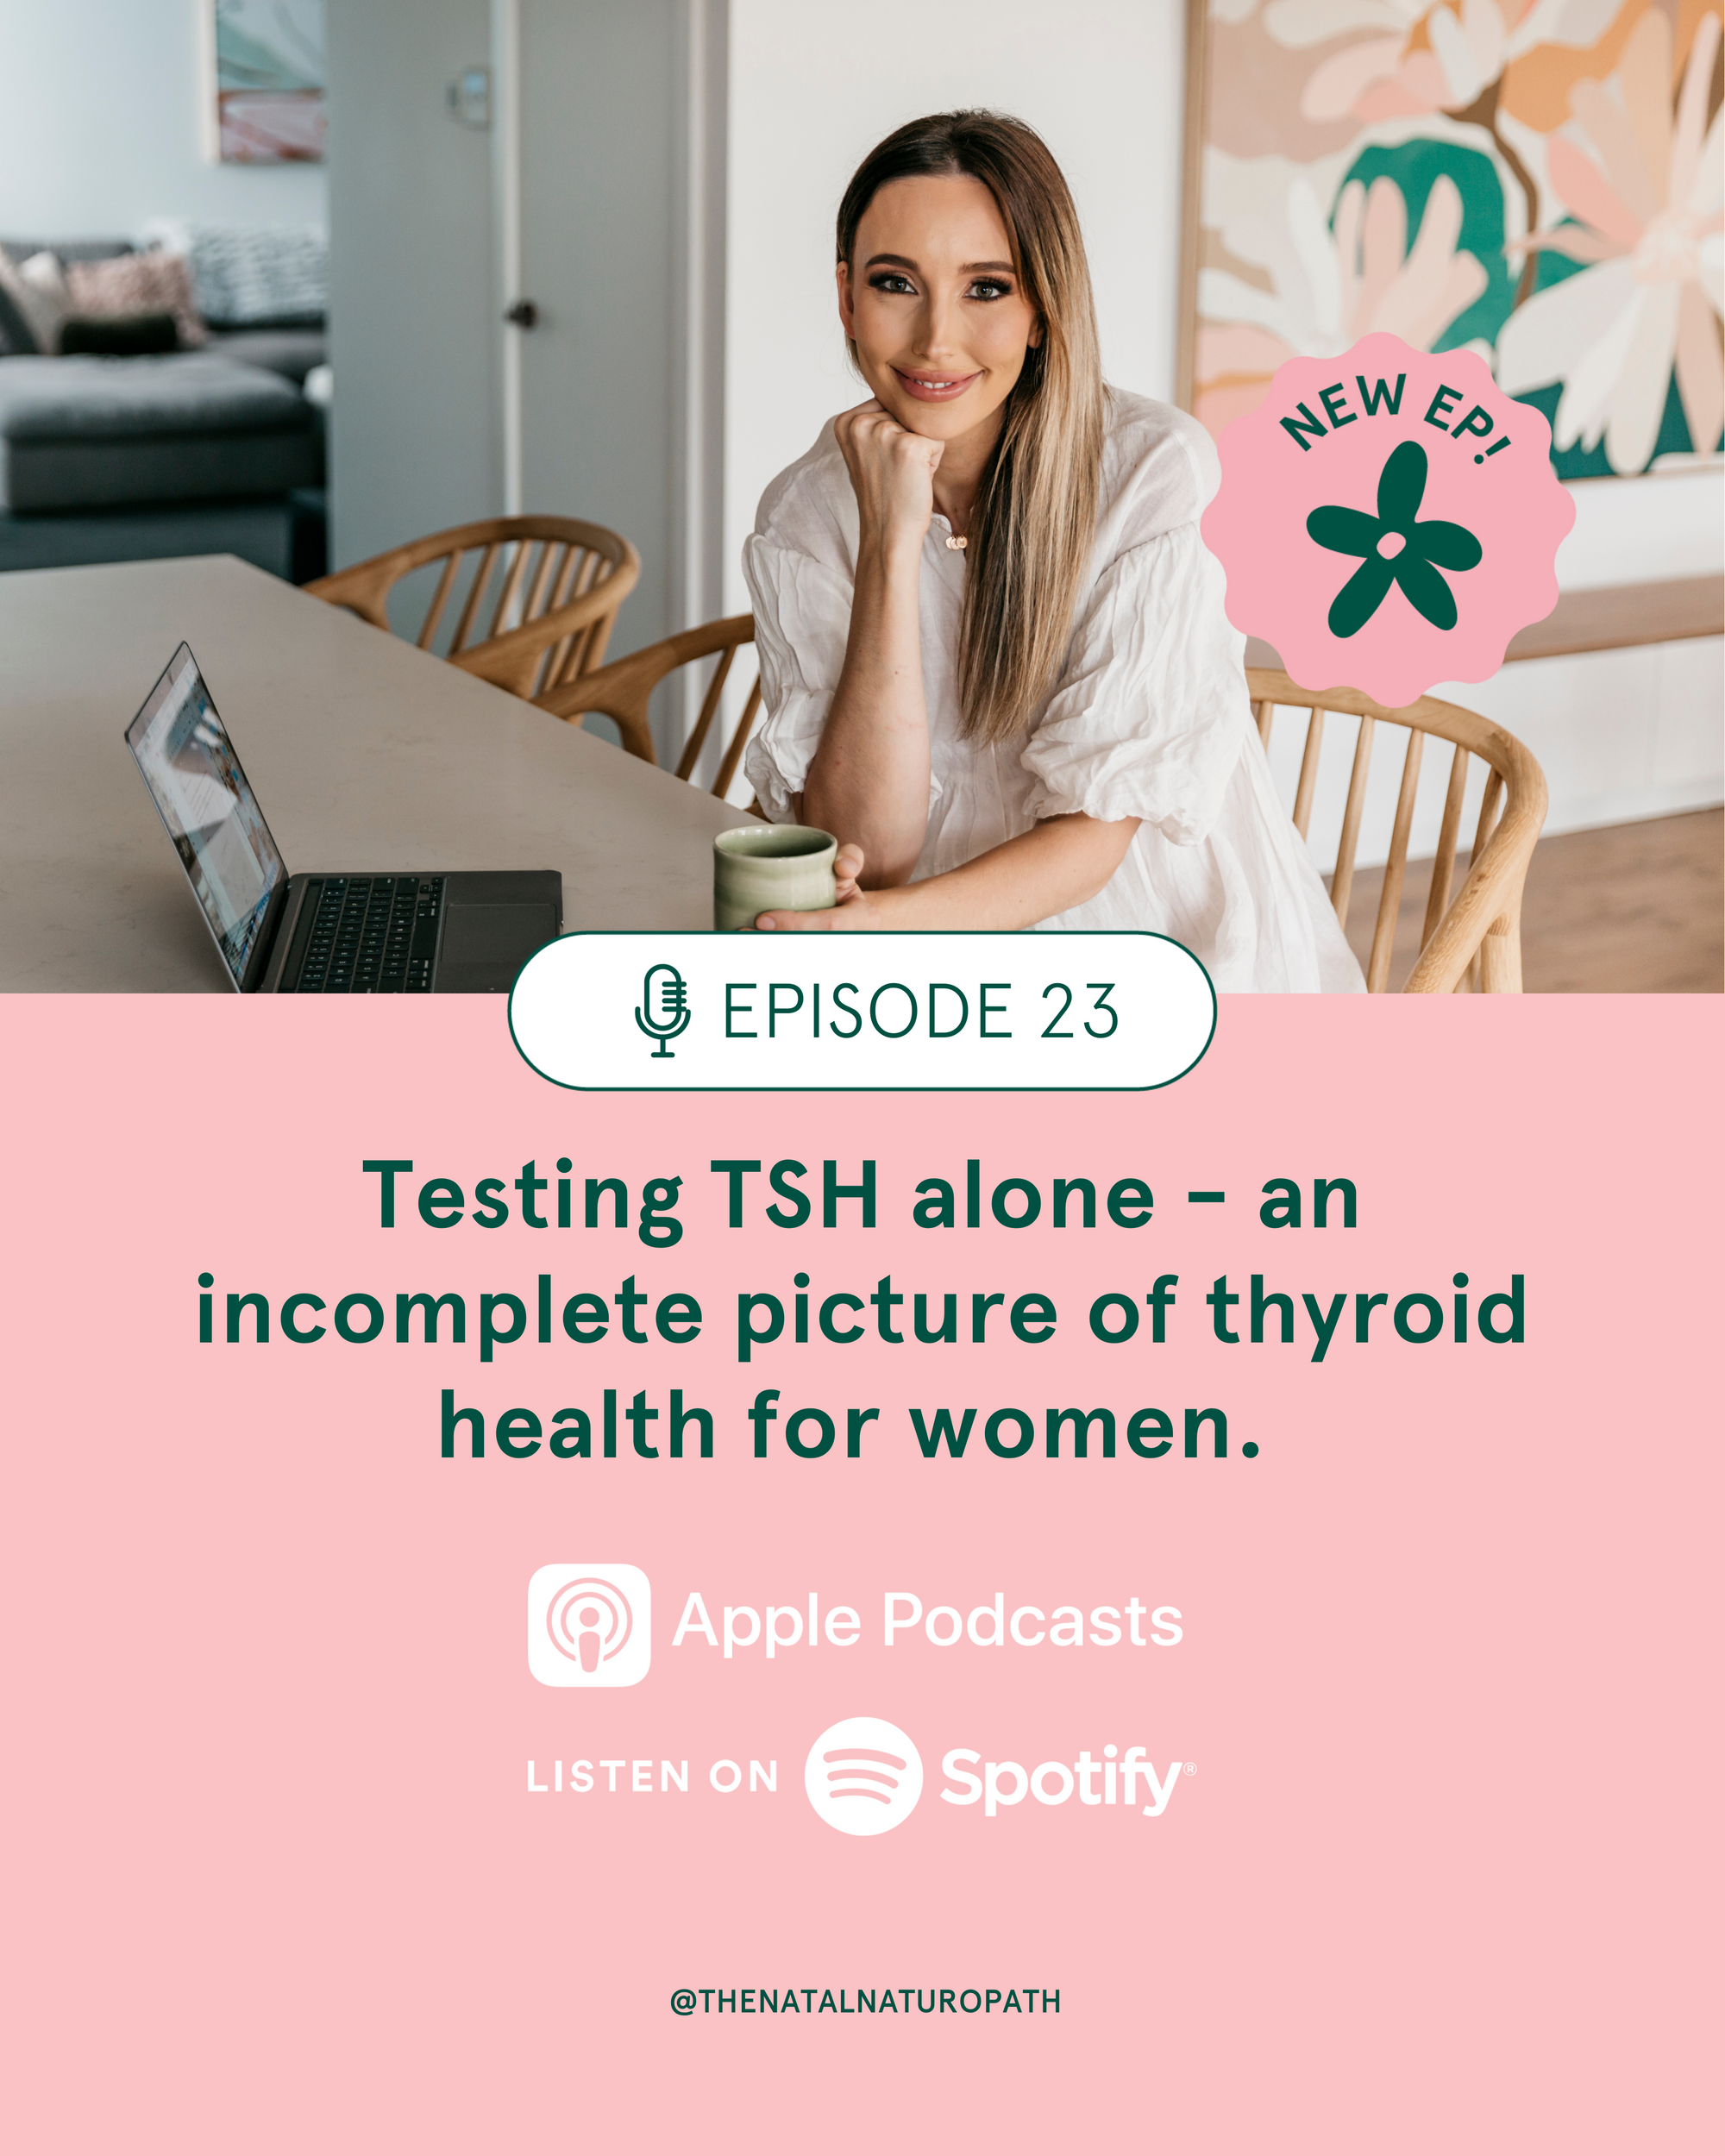 Testing TSH alone - an incomplete picture of thyroid health for women